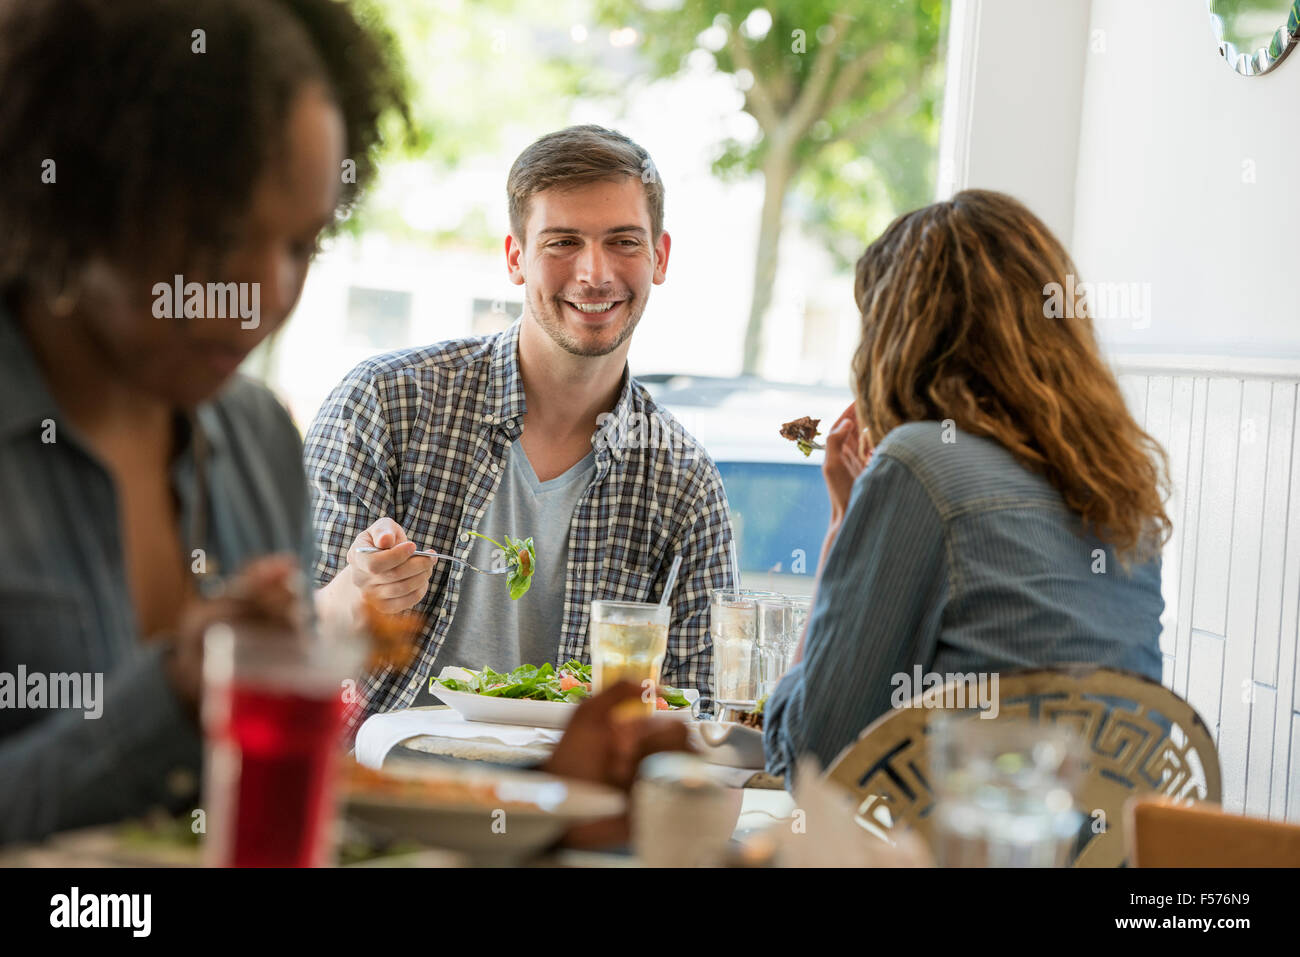 Three people seated at tables at a cafe or diner eating. Stock Photo